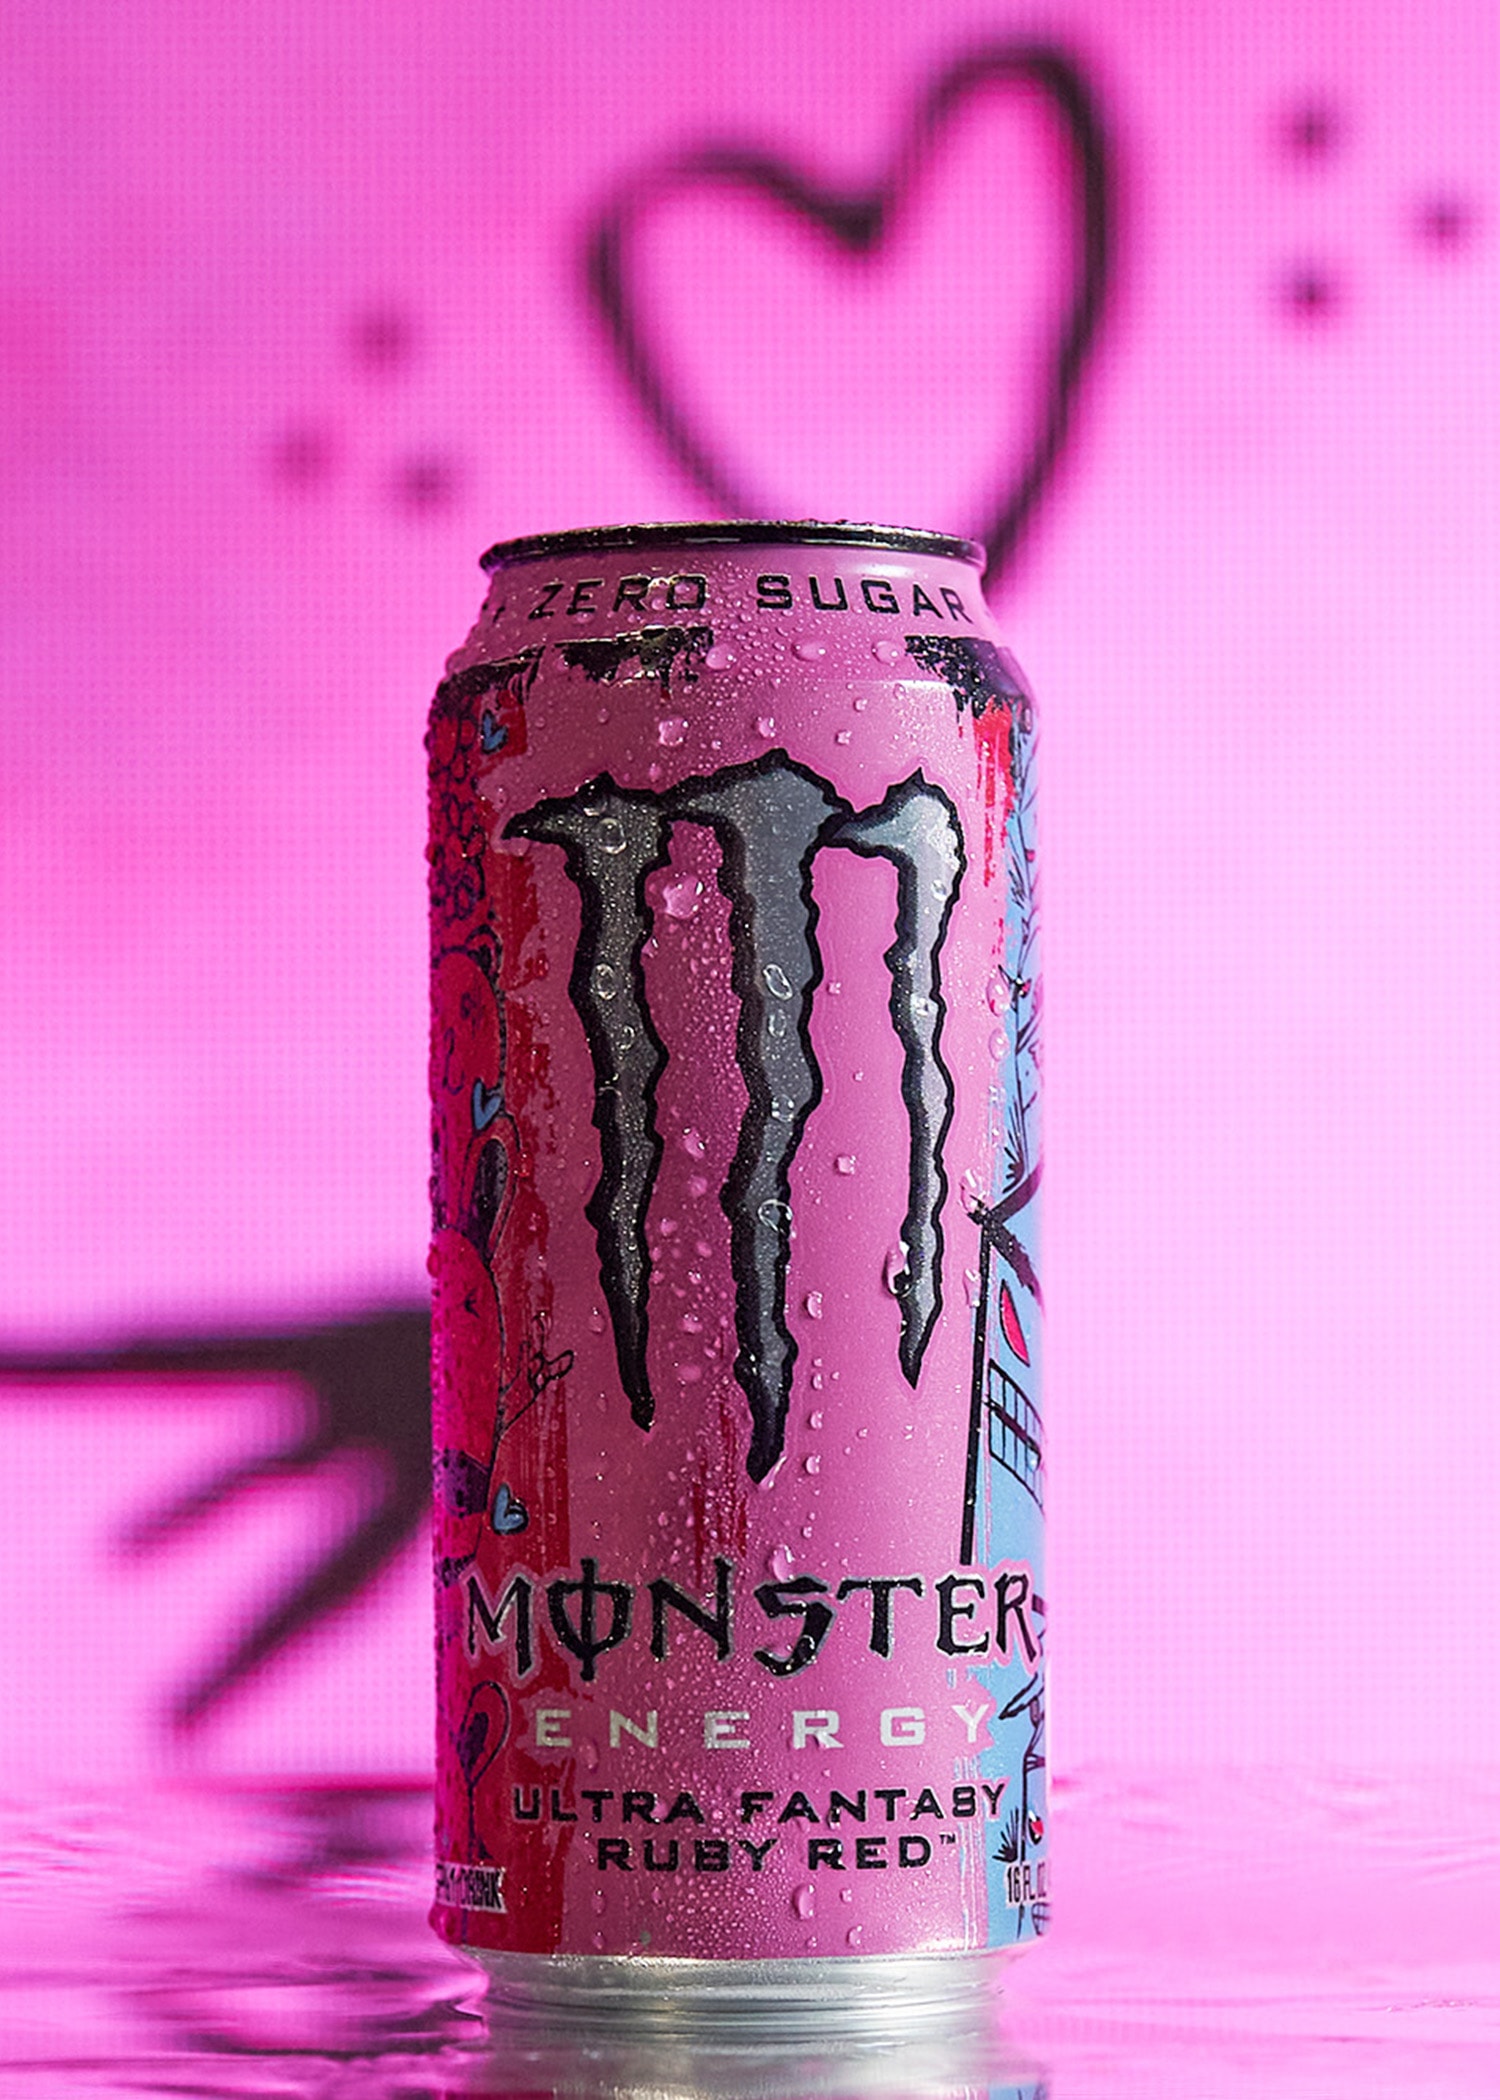 Mark "Pinky" Taylor Designs Playful Cans for Monster Energy Ultra Fantasy Ruby Red